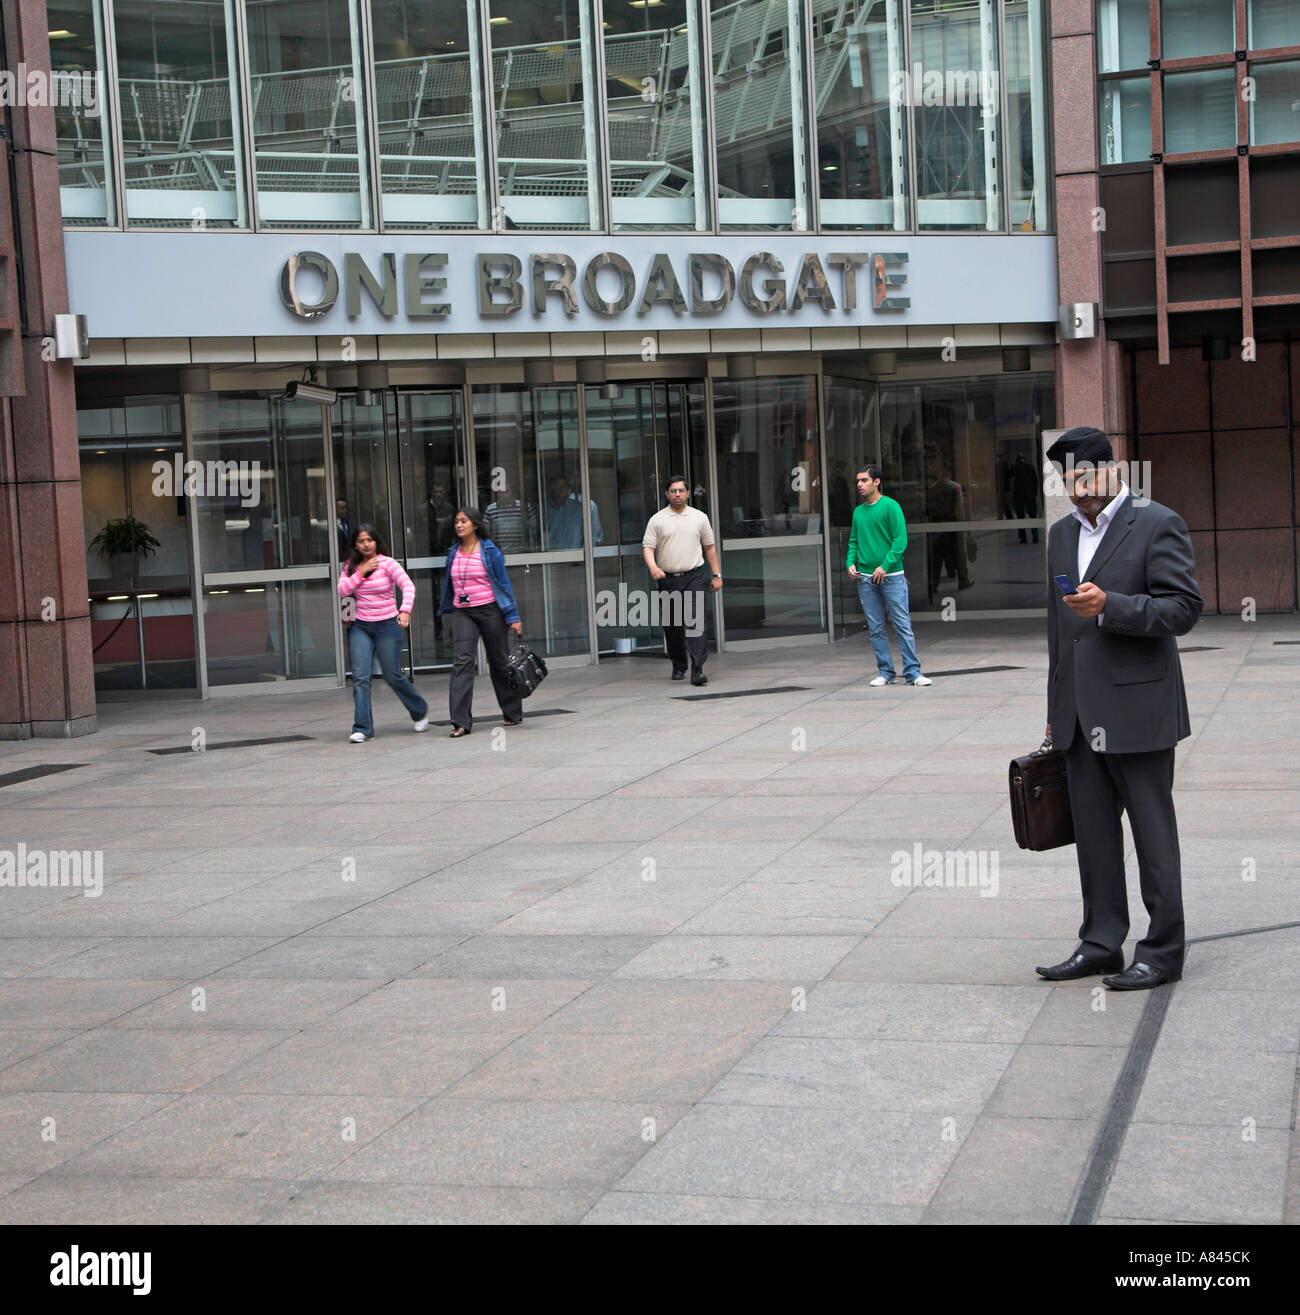 One Broadgate, Sihk businessman in suit, Broadgate Circus, City of London, England Stock Photo